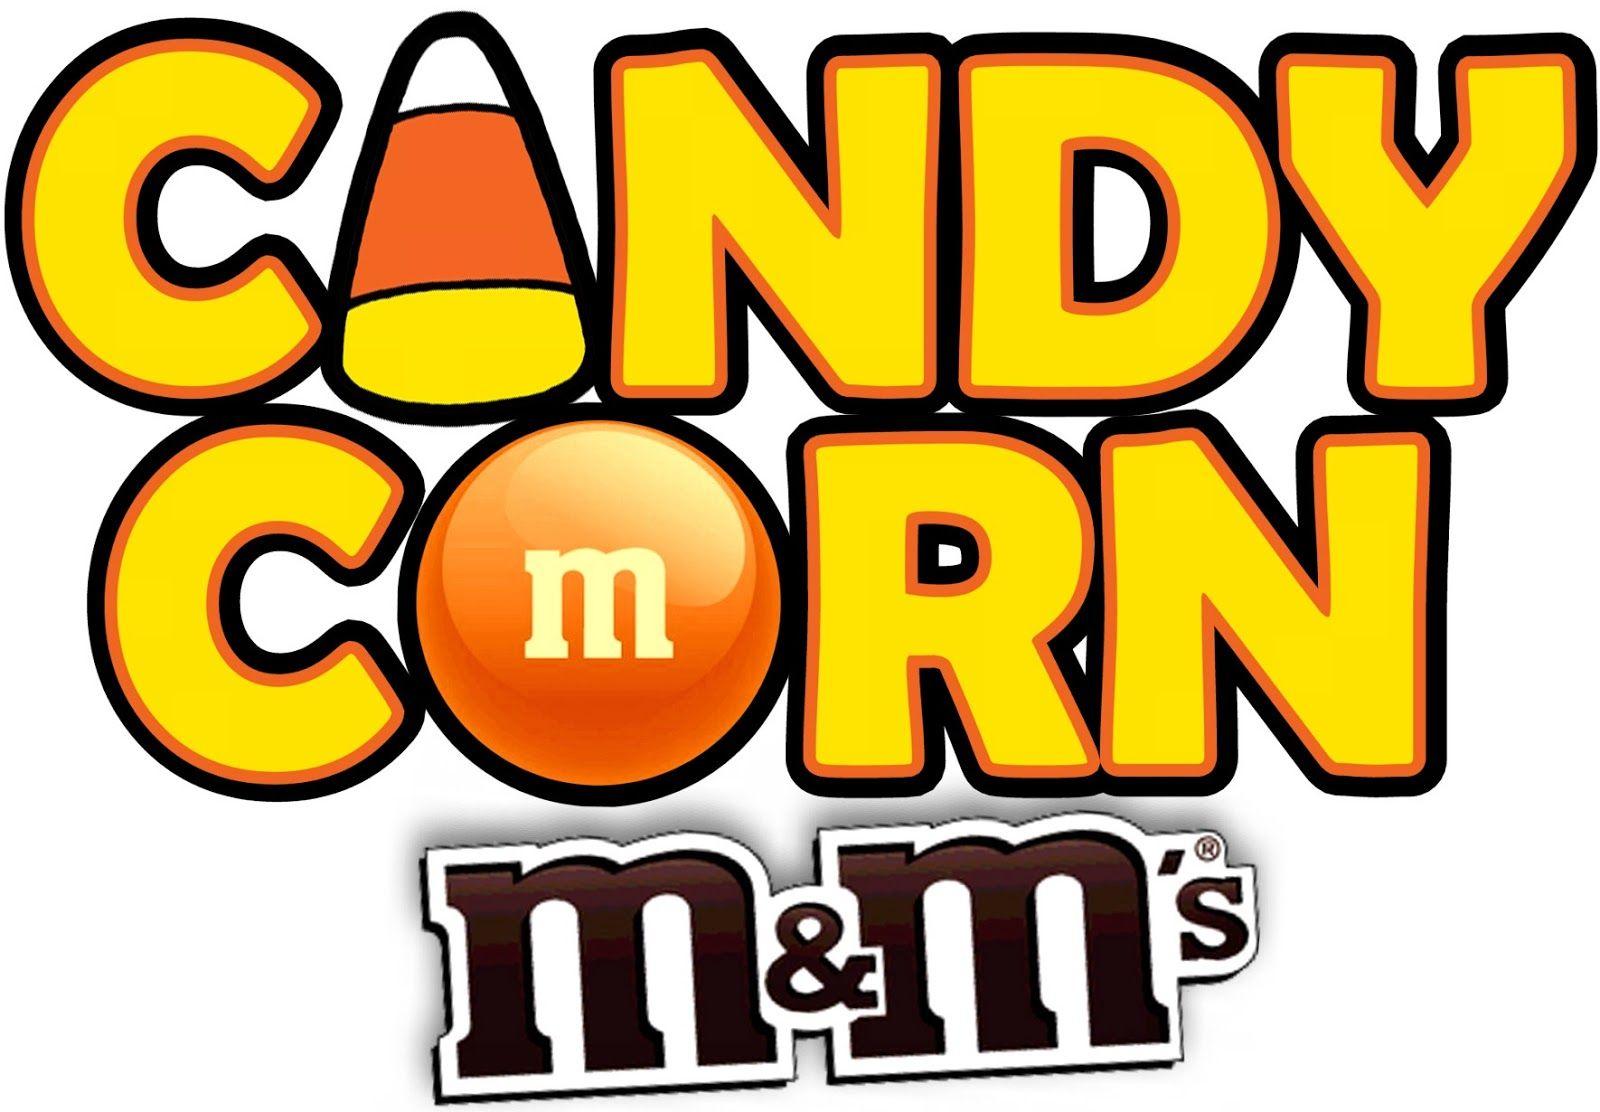 M&M Candy Logo - The Holidaze: Candy Corn M&M's